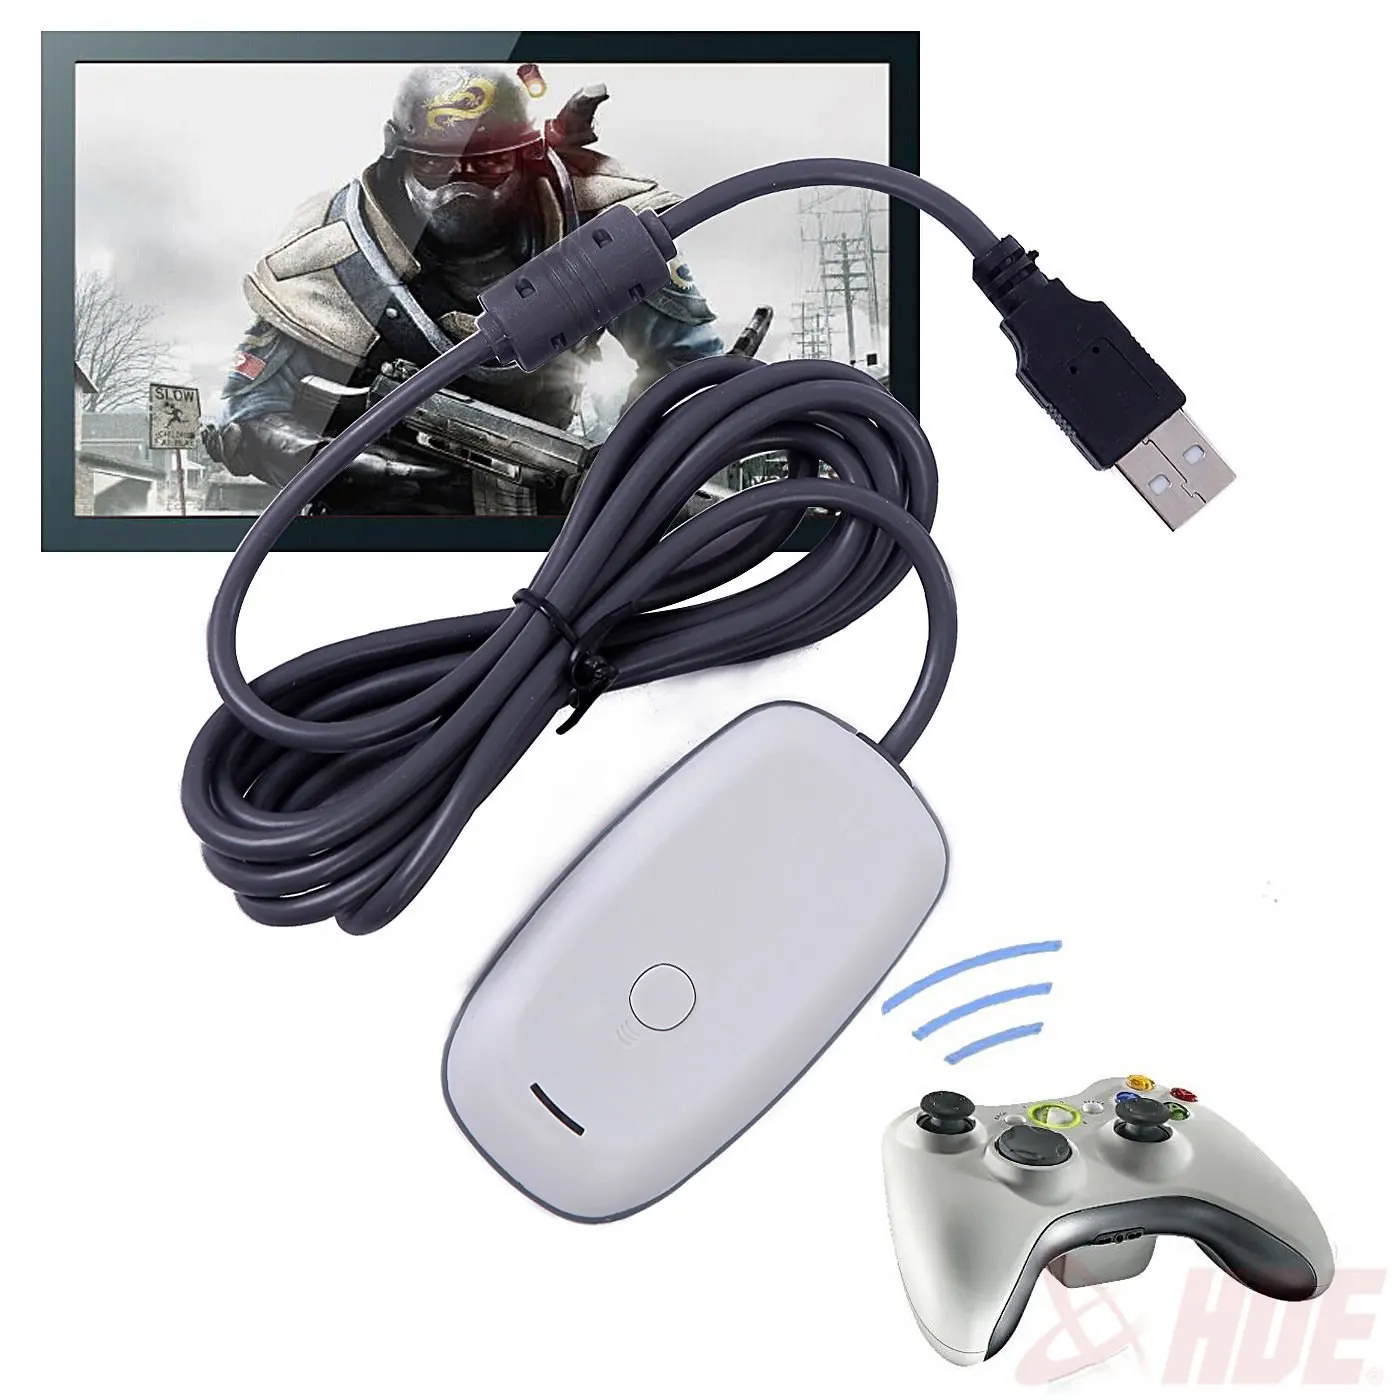 xbox 360 controller to pc without adapter